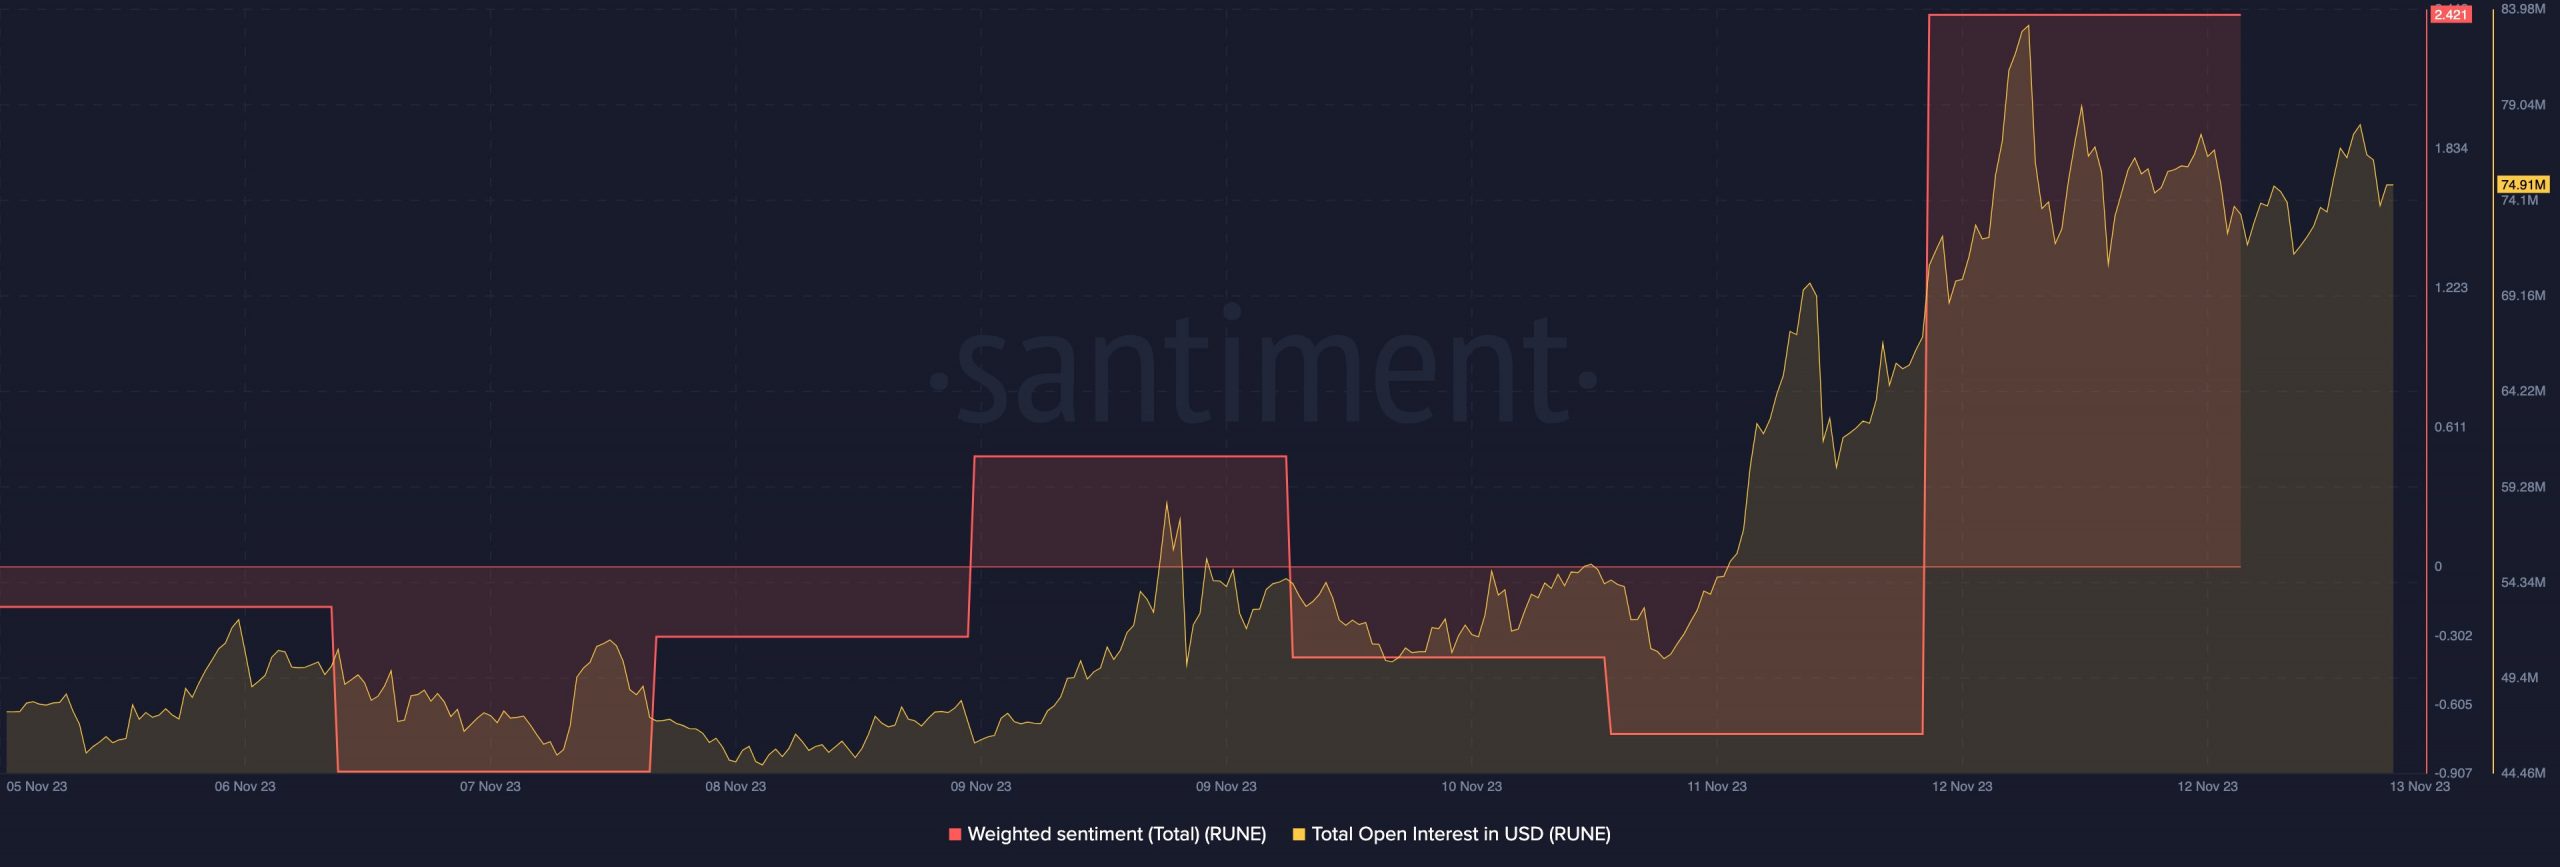 RUNE weighted sentiment and open interest on exchanges